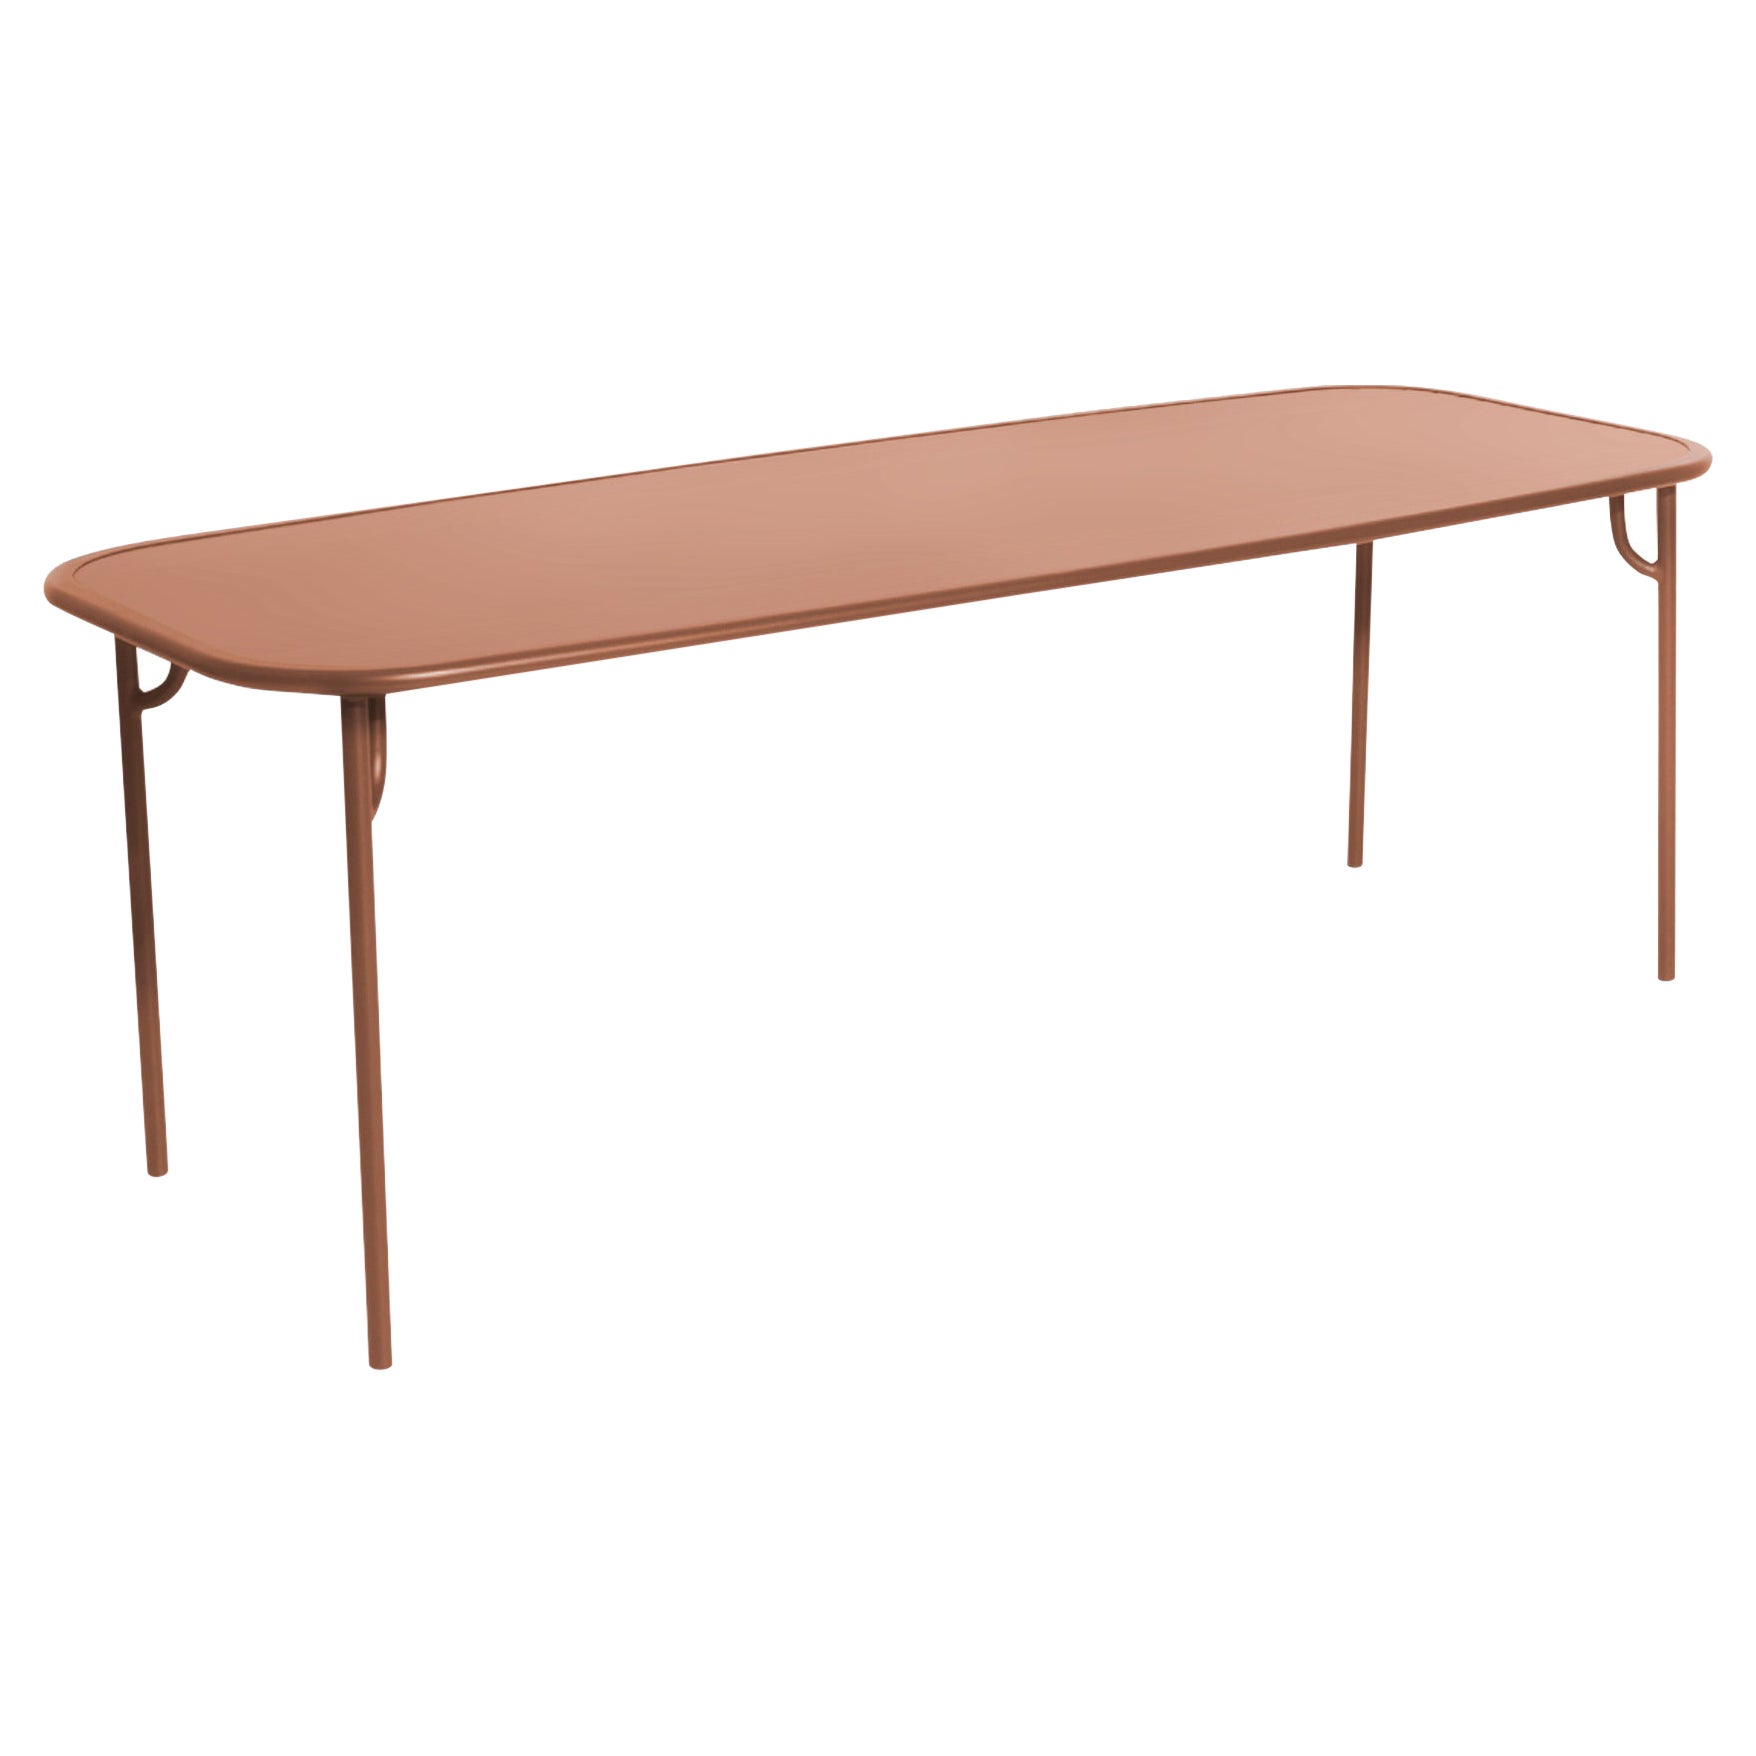 Petite Friture Week-End Large Plain Rectangular Dining Table in Terracotta For Sale